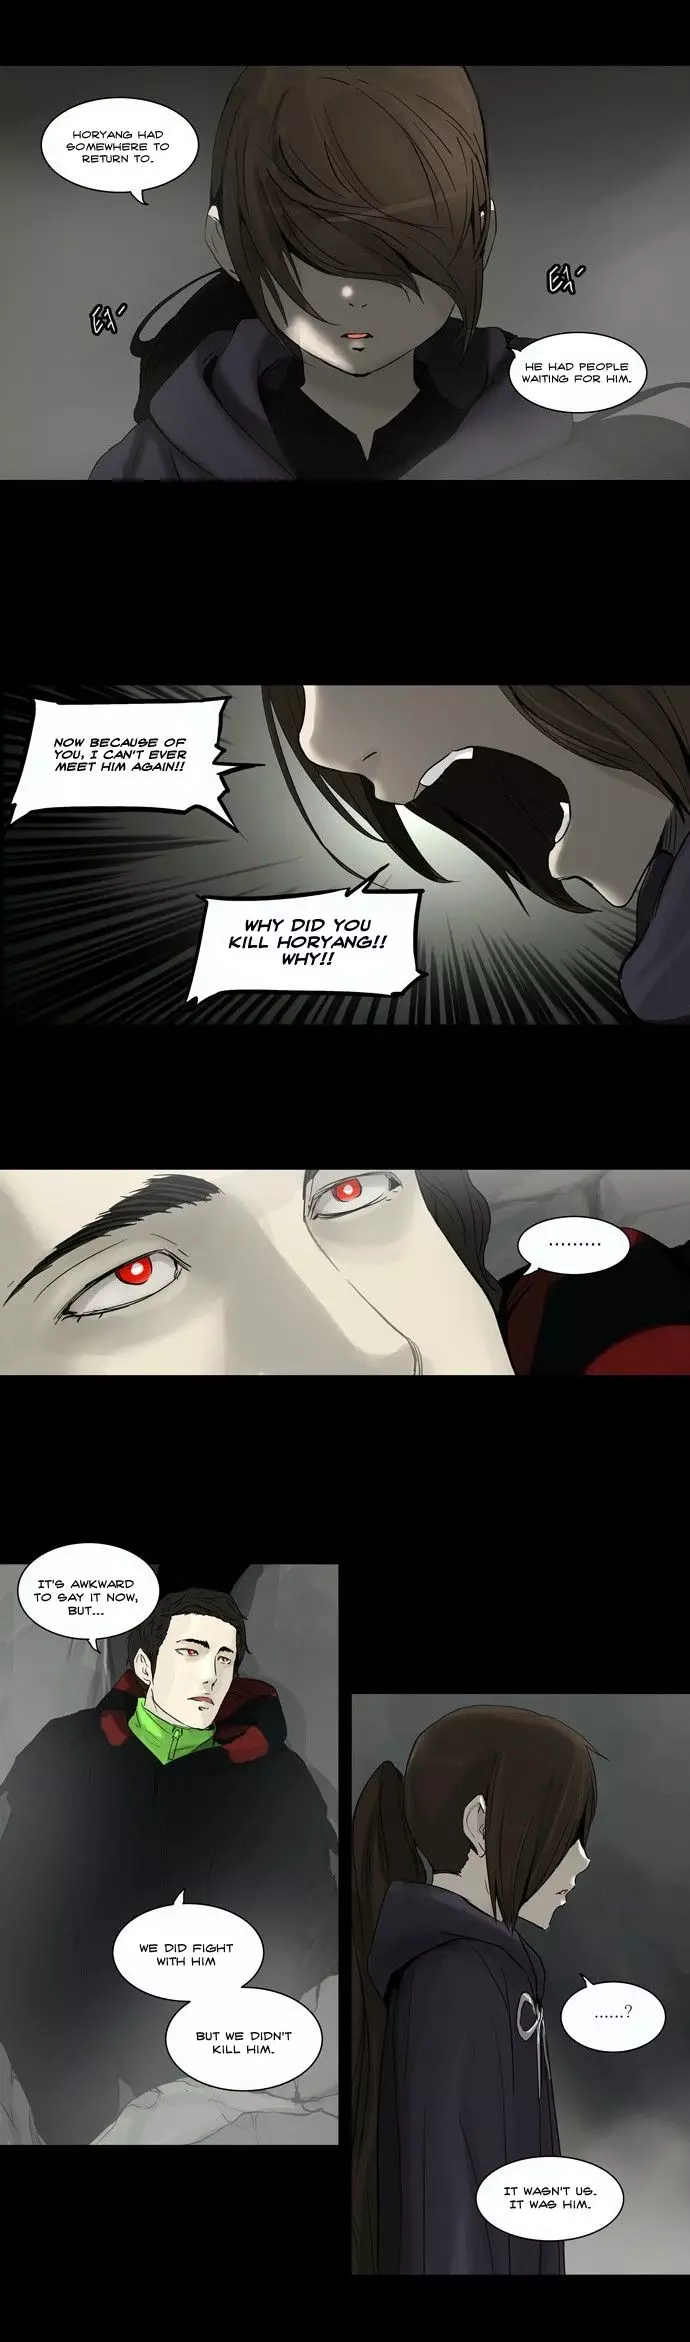 Tower of God - 129 page p_00023